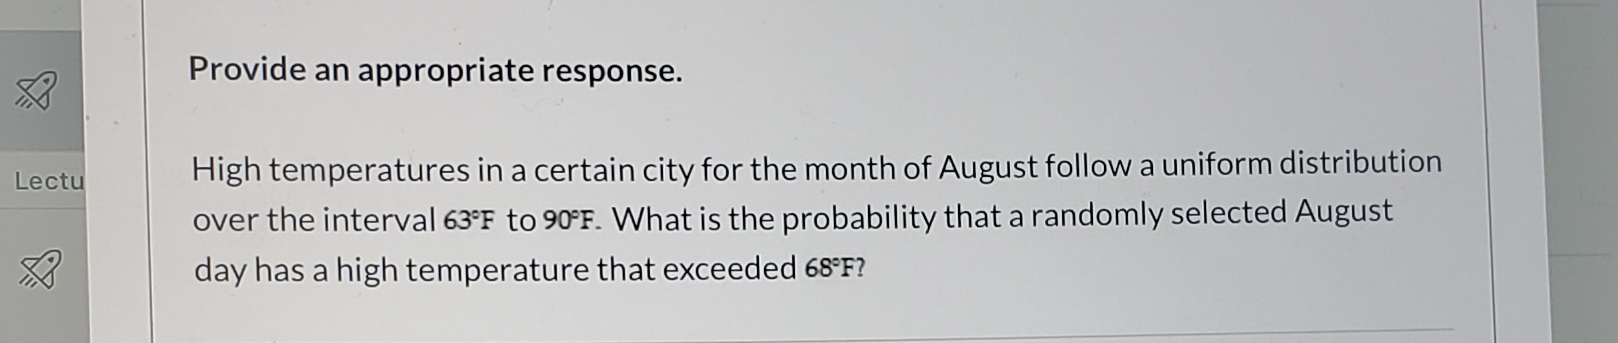 Provide an appropriate response.
High temperatures in a certain city for the month of August follow a uniform distribution
over the interval 63°F to 90°F. What is the probability that a randomly selected August
Lectu
day has a high temperature that exceeded 68°F?
